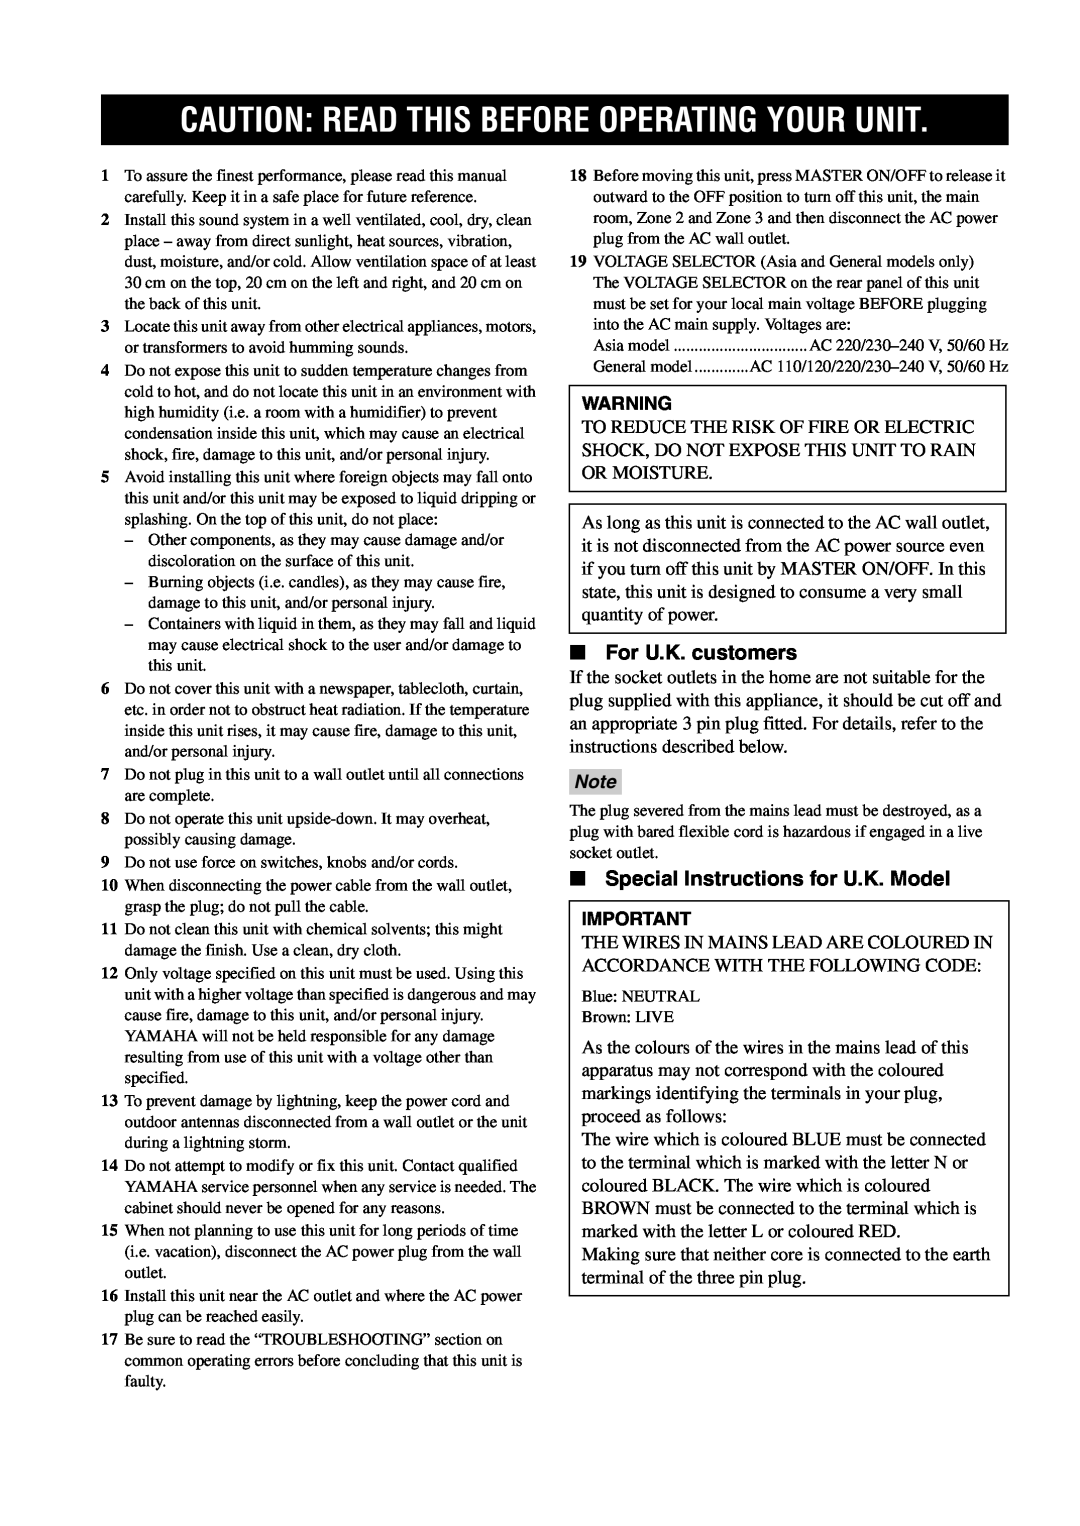 Yamaha RX-V2600 Caution Read This Before Operating Your Unit, For U.K. customers, Special Instructions for U.K. Model 